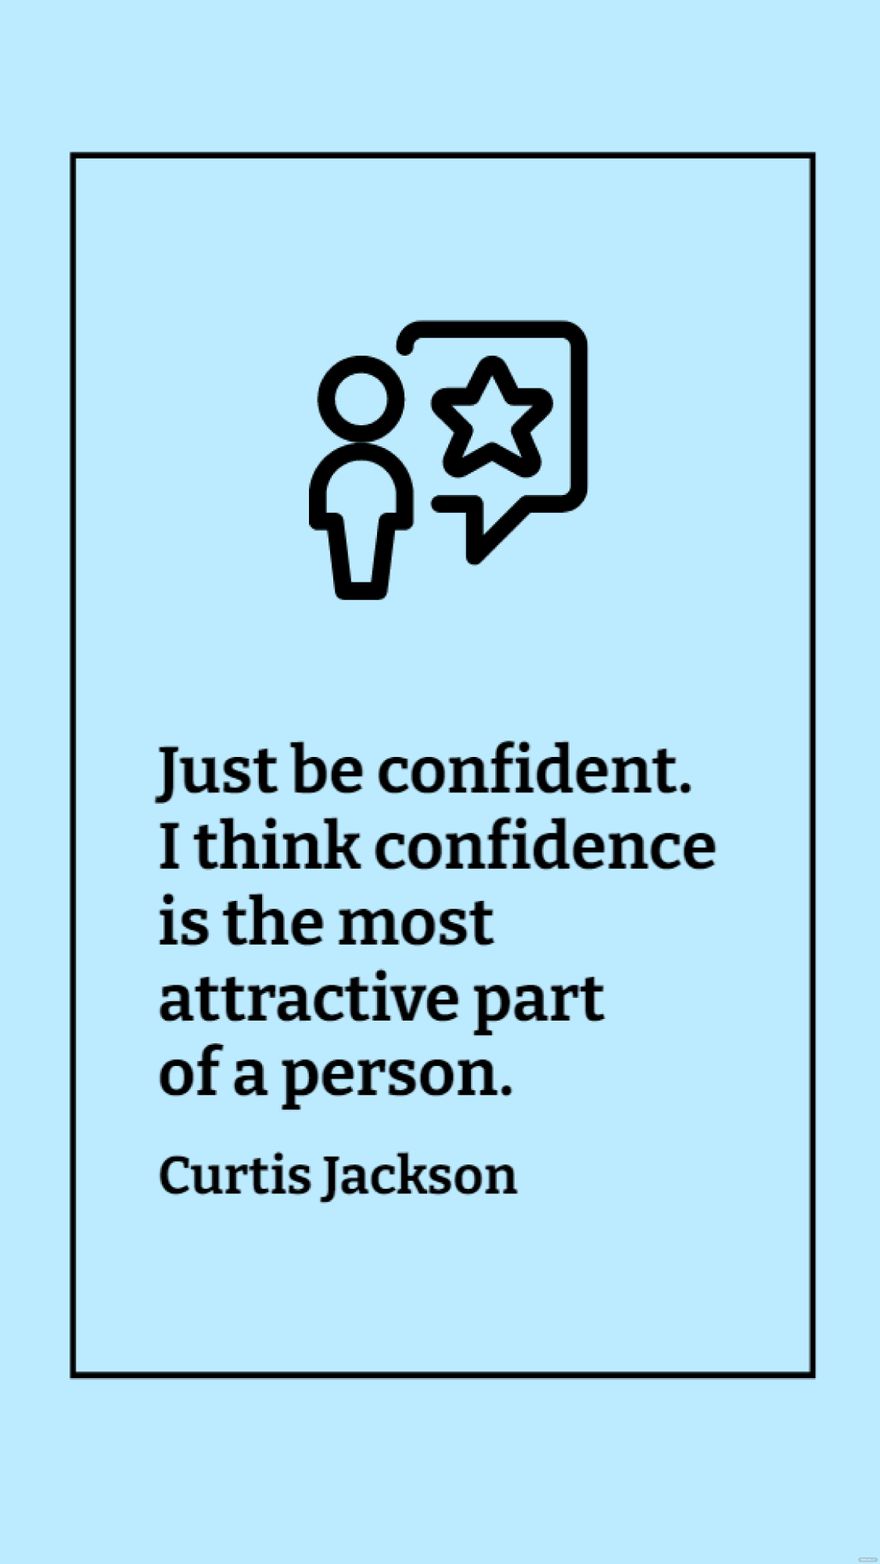 Curtis Jackson - Just be confident. I think confidence is the most attractive part of a person.